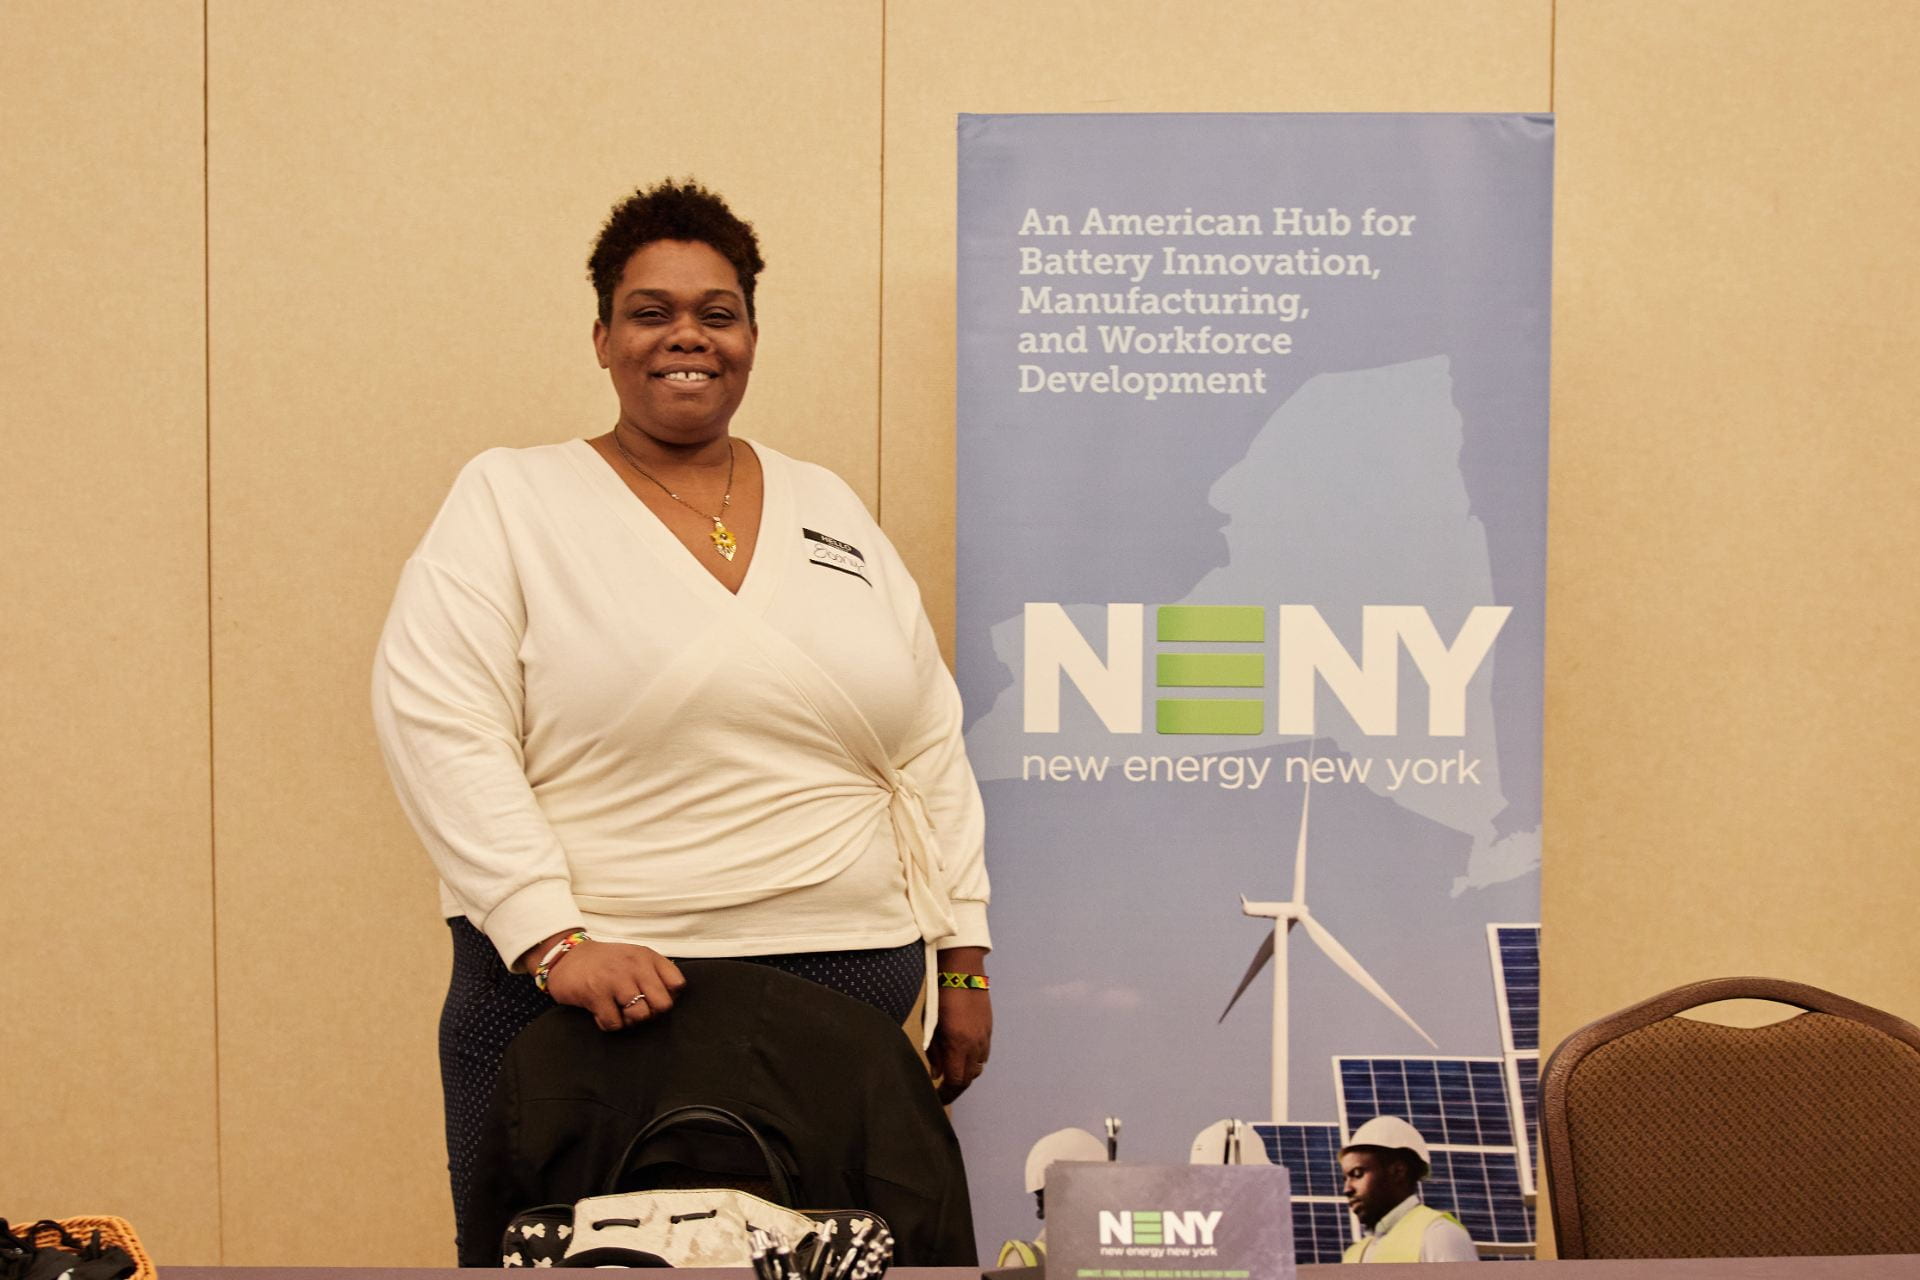 A woman in a white top with a poster that says NENY stands and smiles at the camera from behind a table.